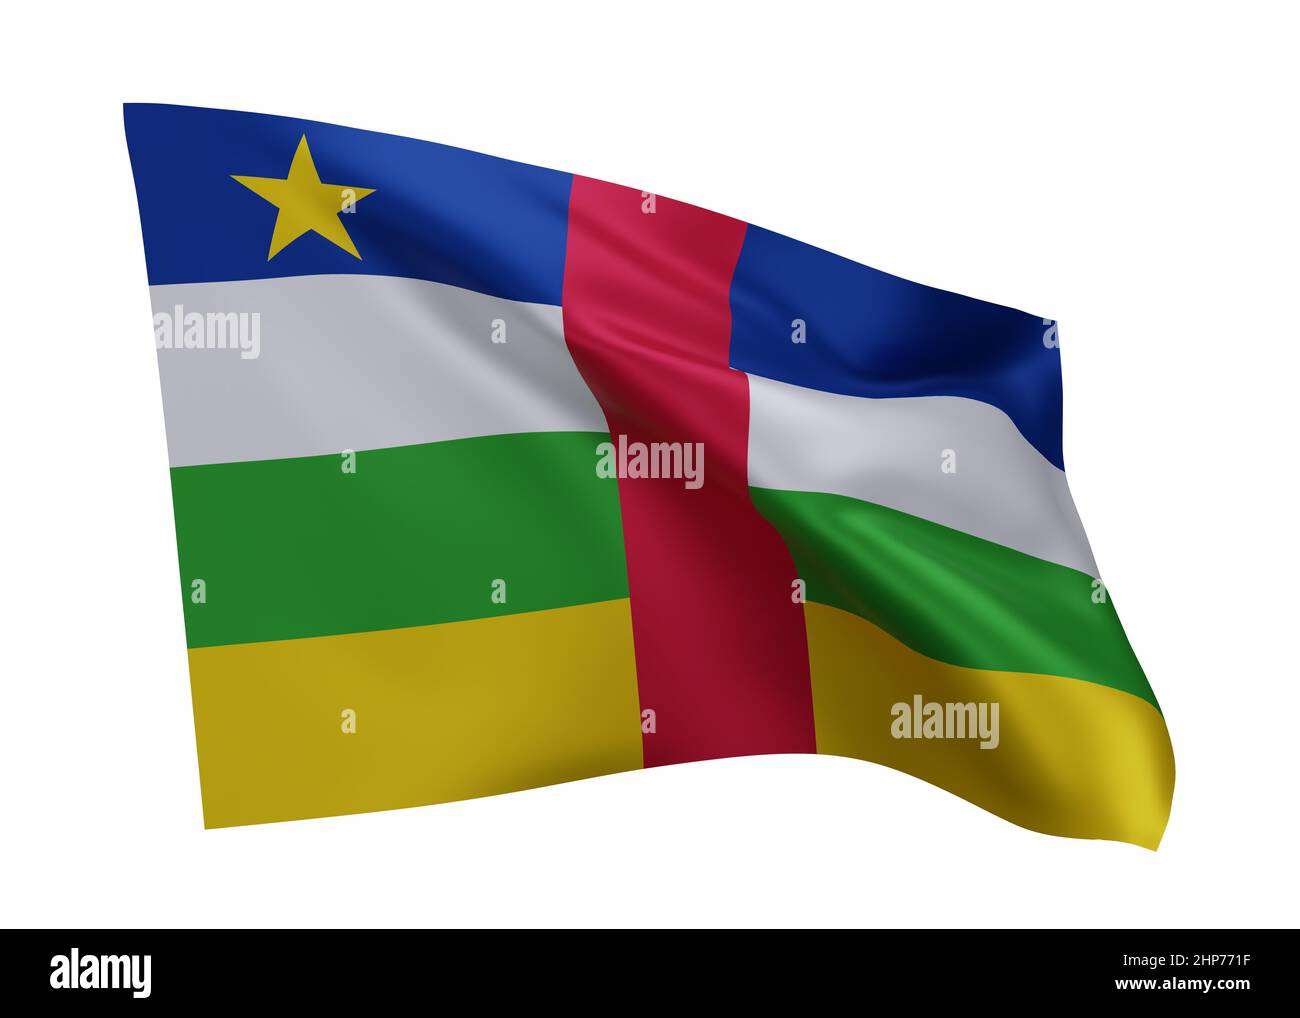 3d illustration flag of Central African Republic. Central African Republic high resolution flag isolated against white background. 3d rendering Stock Photo